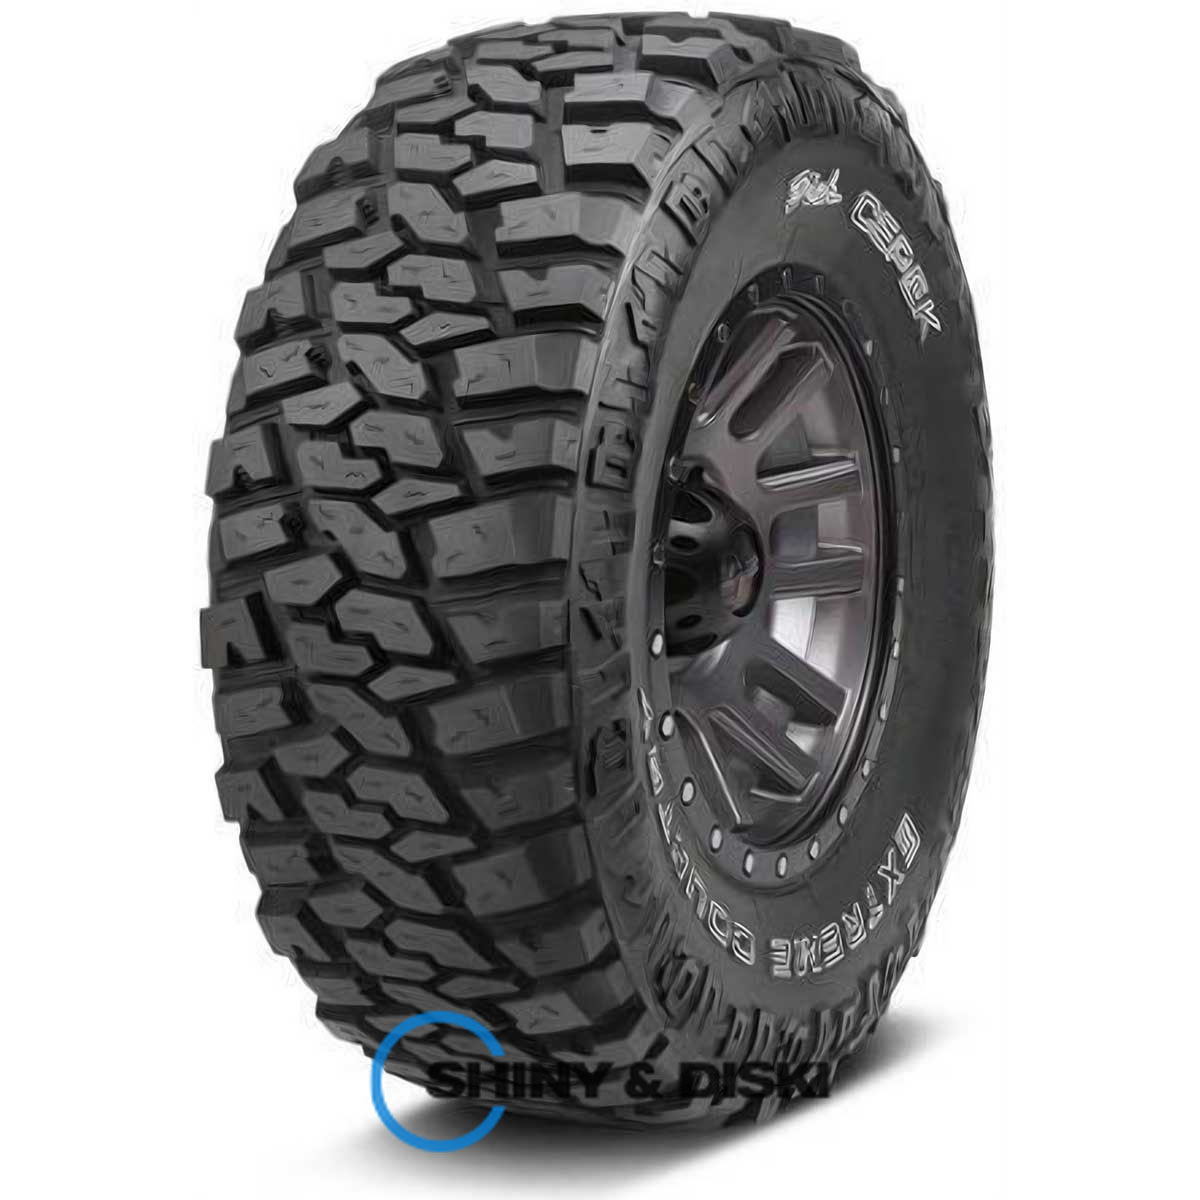 dick cepek extreme country 315/70 r17 121/118q